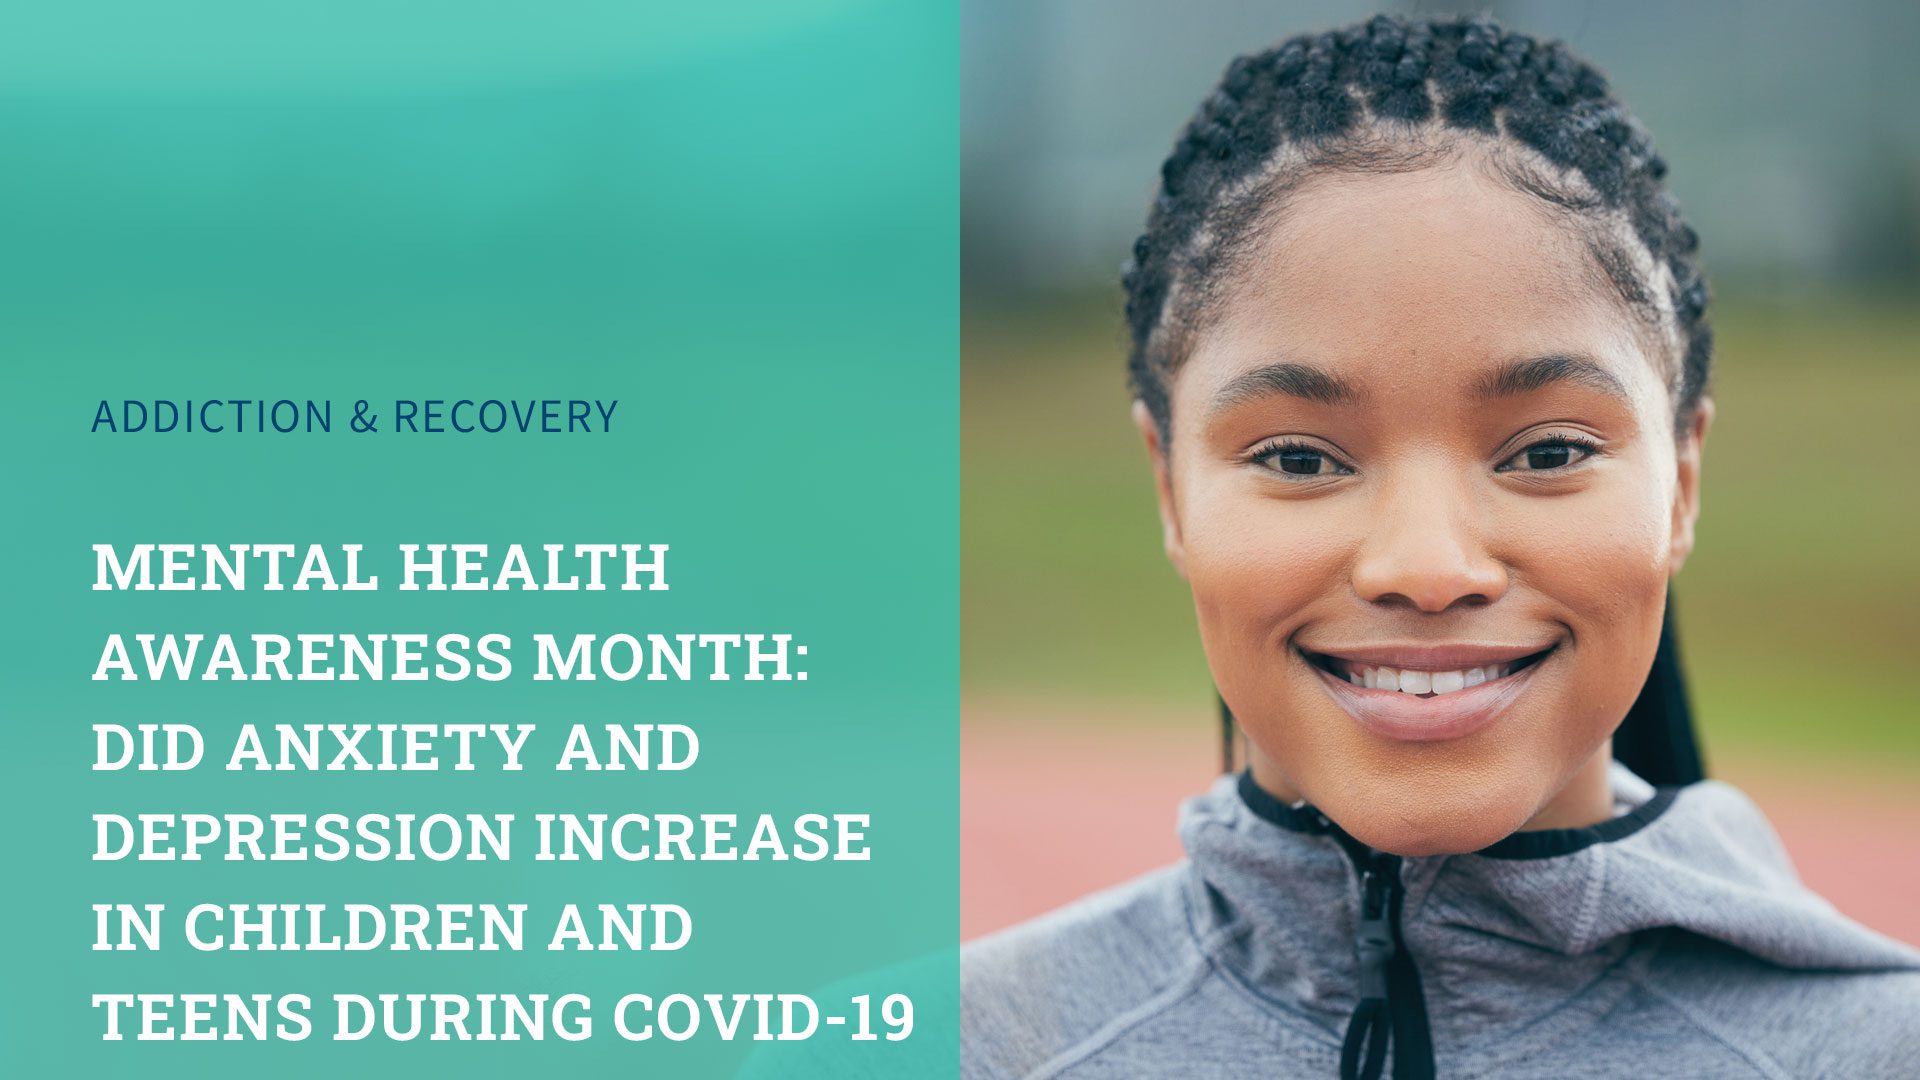 Mental Health Awareness Month: Did Anxiety and Depression Increase in Children and Teens During COVID-19